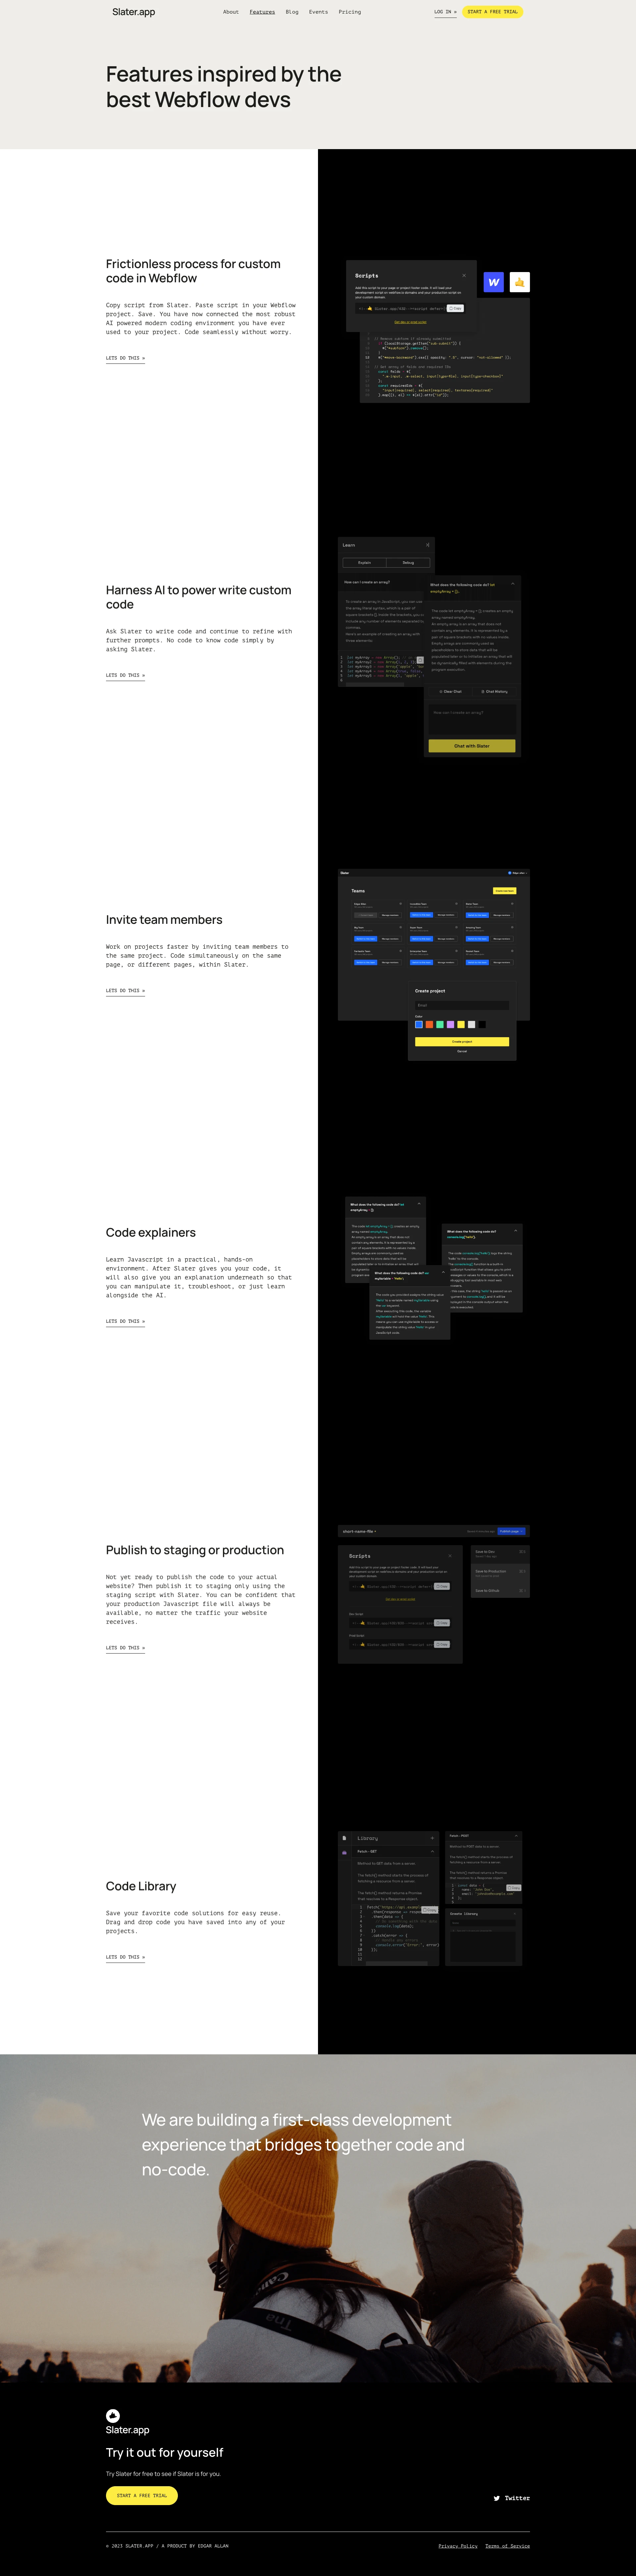 Slater Landing Page Example: The scripting layer for Webflow powered by AI. Turn no-code.. into know-code. Slater is an modern coding environment with an inbuilt AI tool. Get custom code quickly with no character limits.